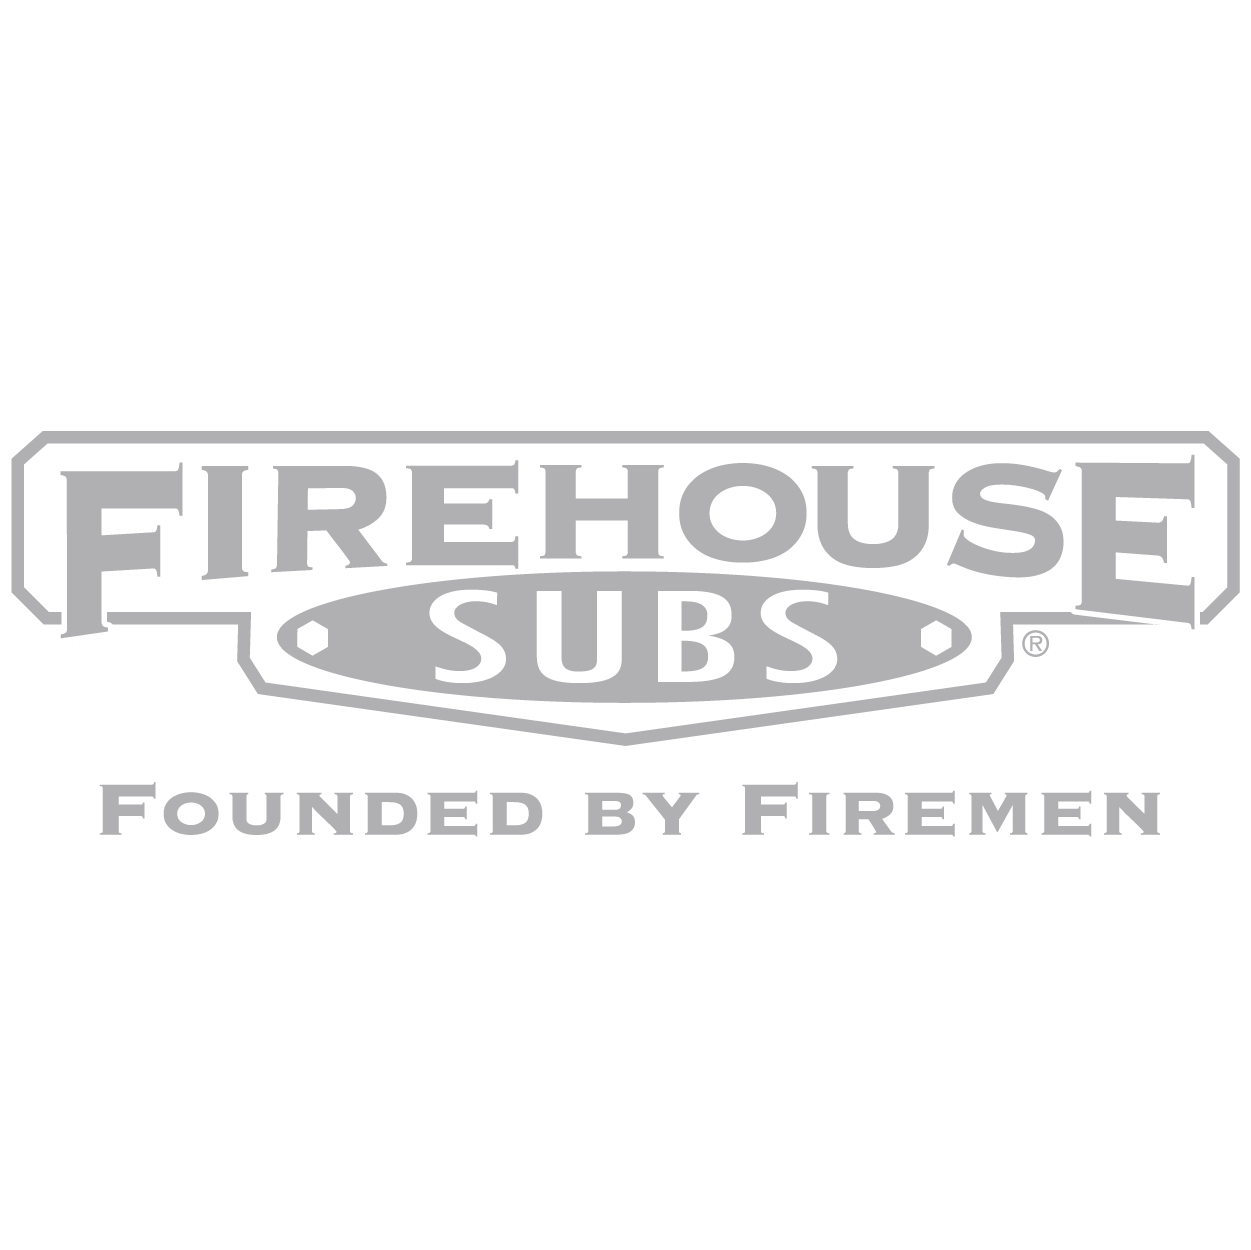 Firehouse Subs logo in gray